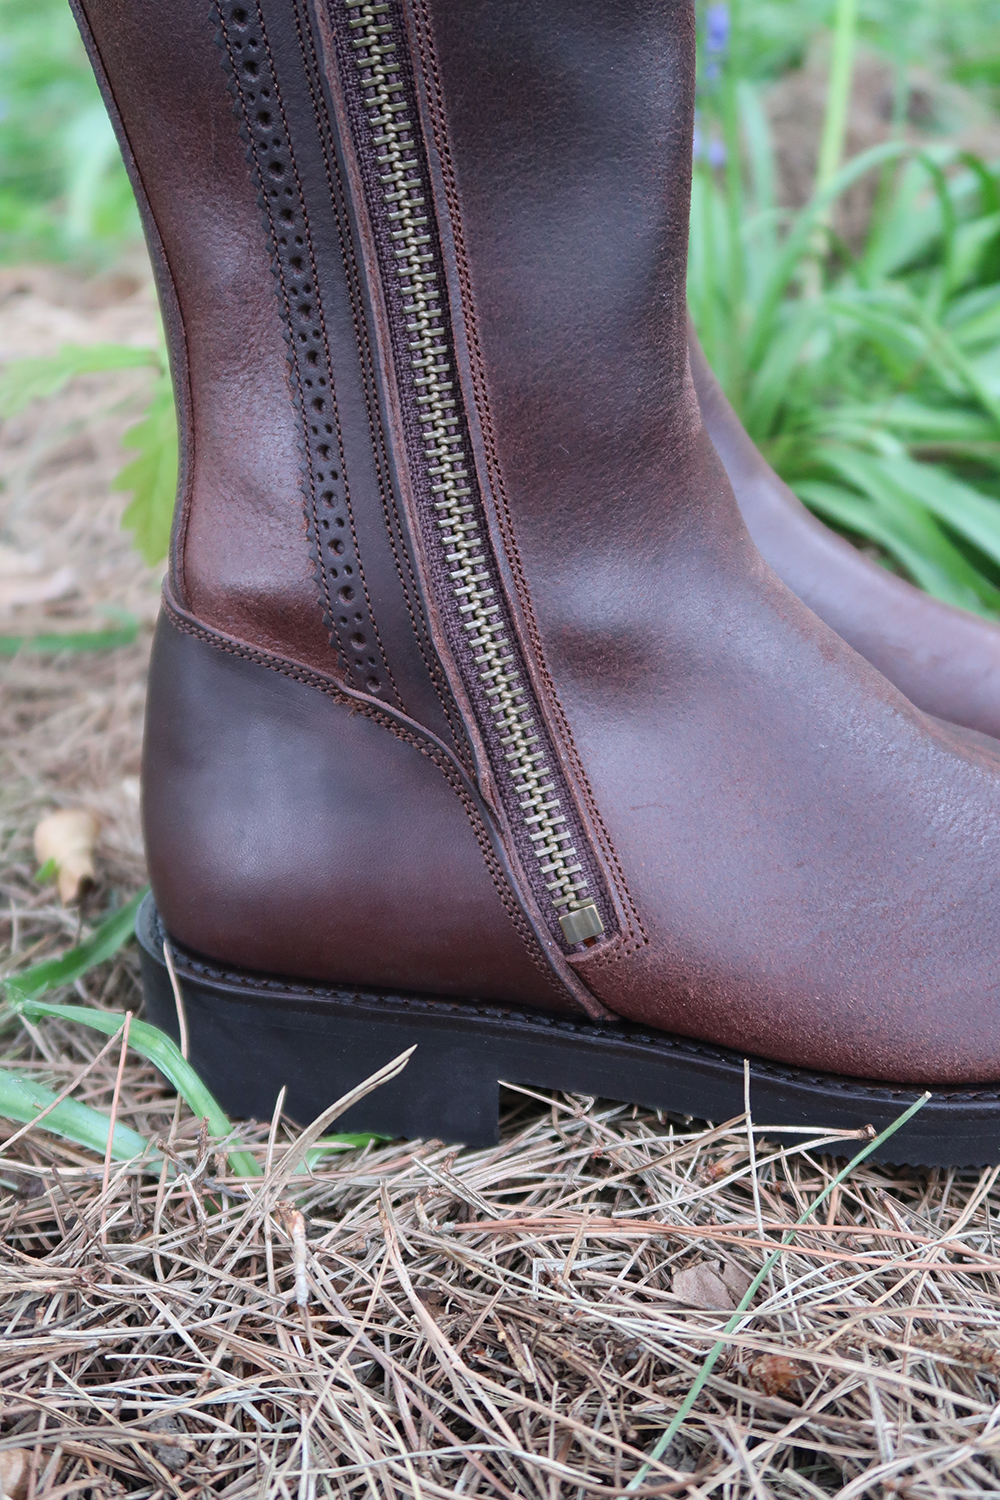 The Spanish Boot Company Tall Flat Sole Boots in Brown Charlotte in England